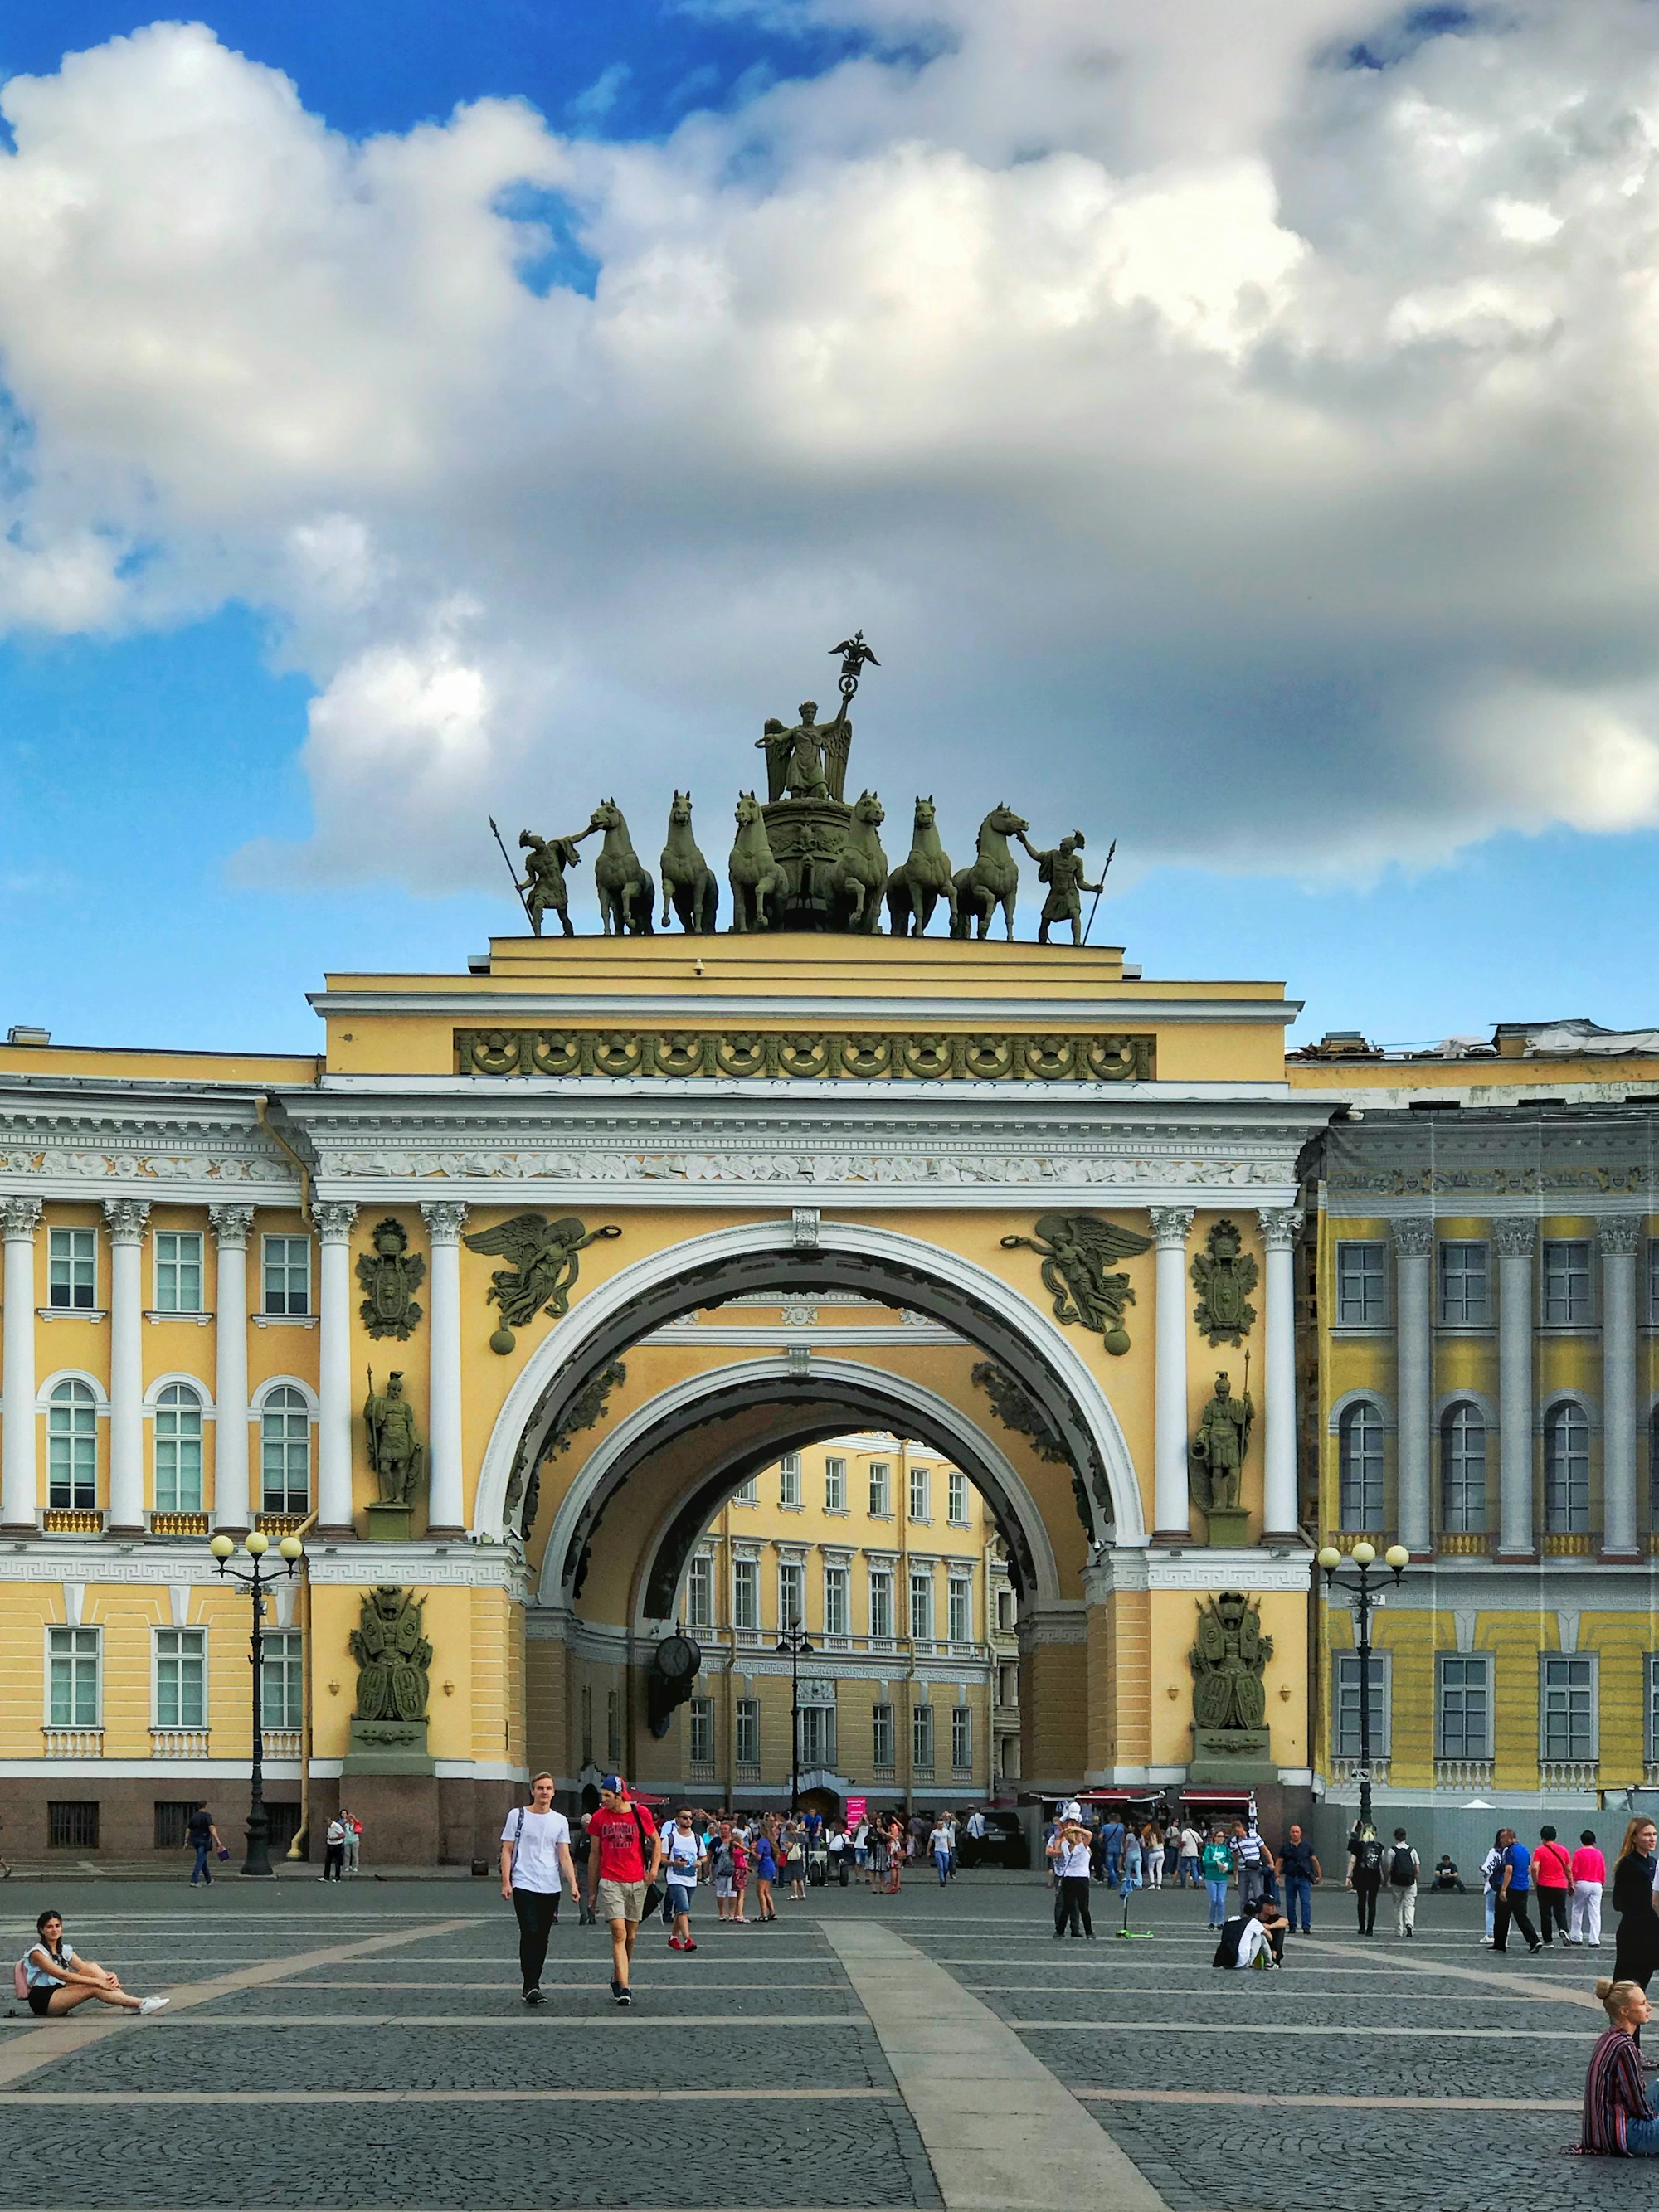 St. Petersburg Culture & Traditions Travel Guide